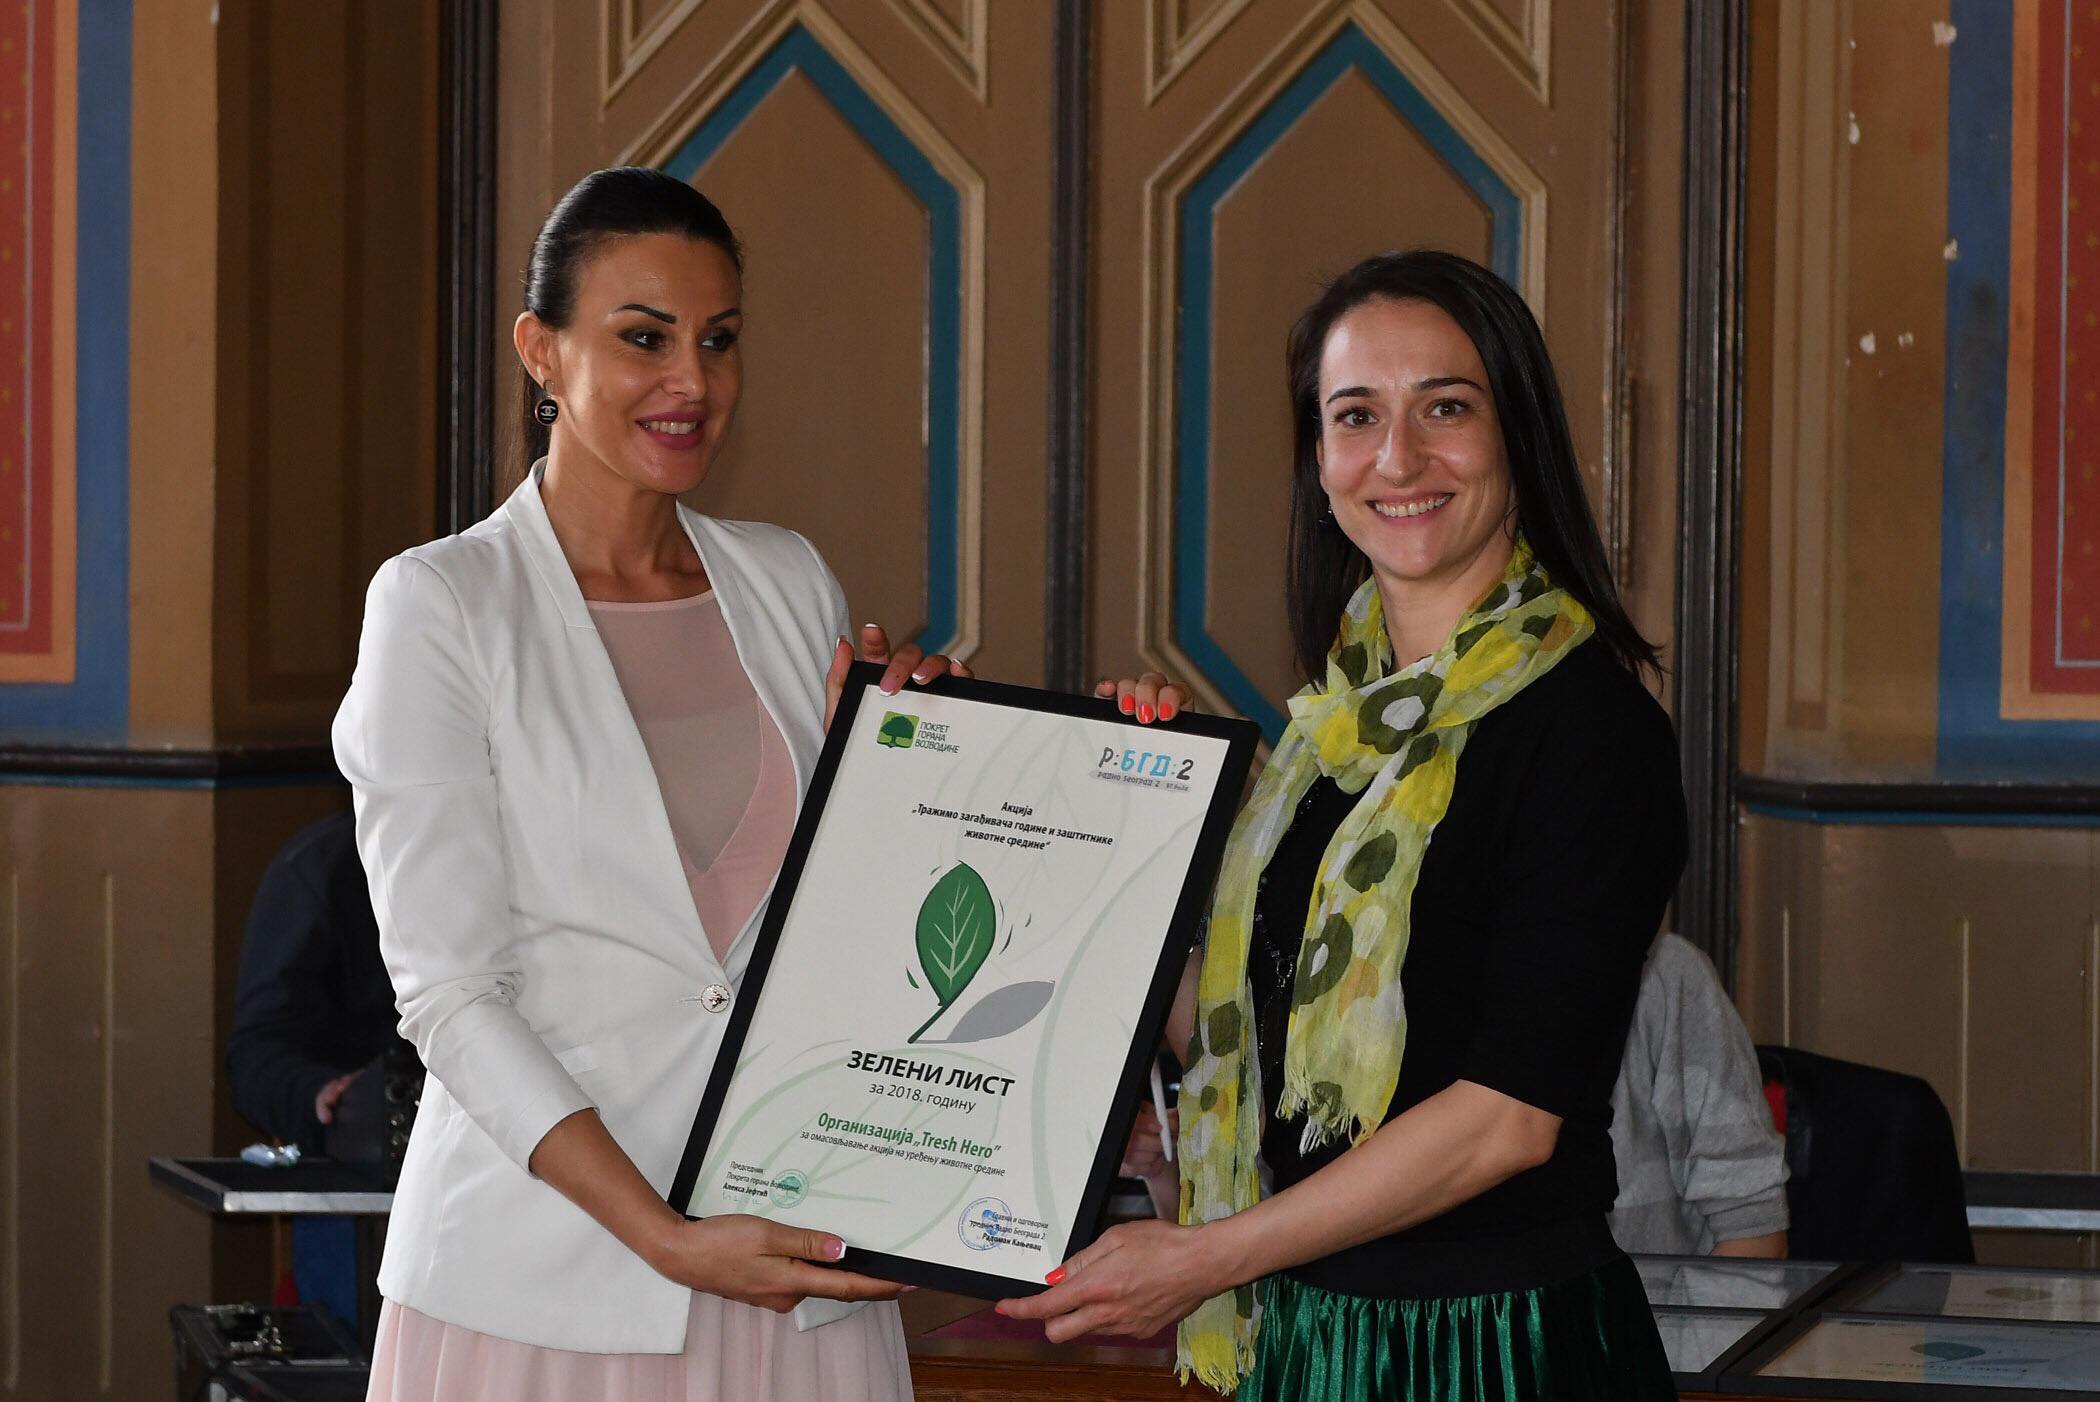 Trash Hero Beograd recognised with Green Leaf Award